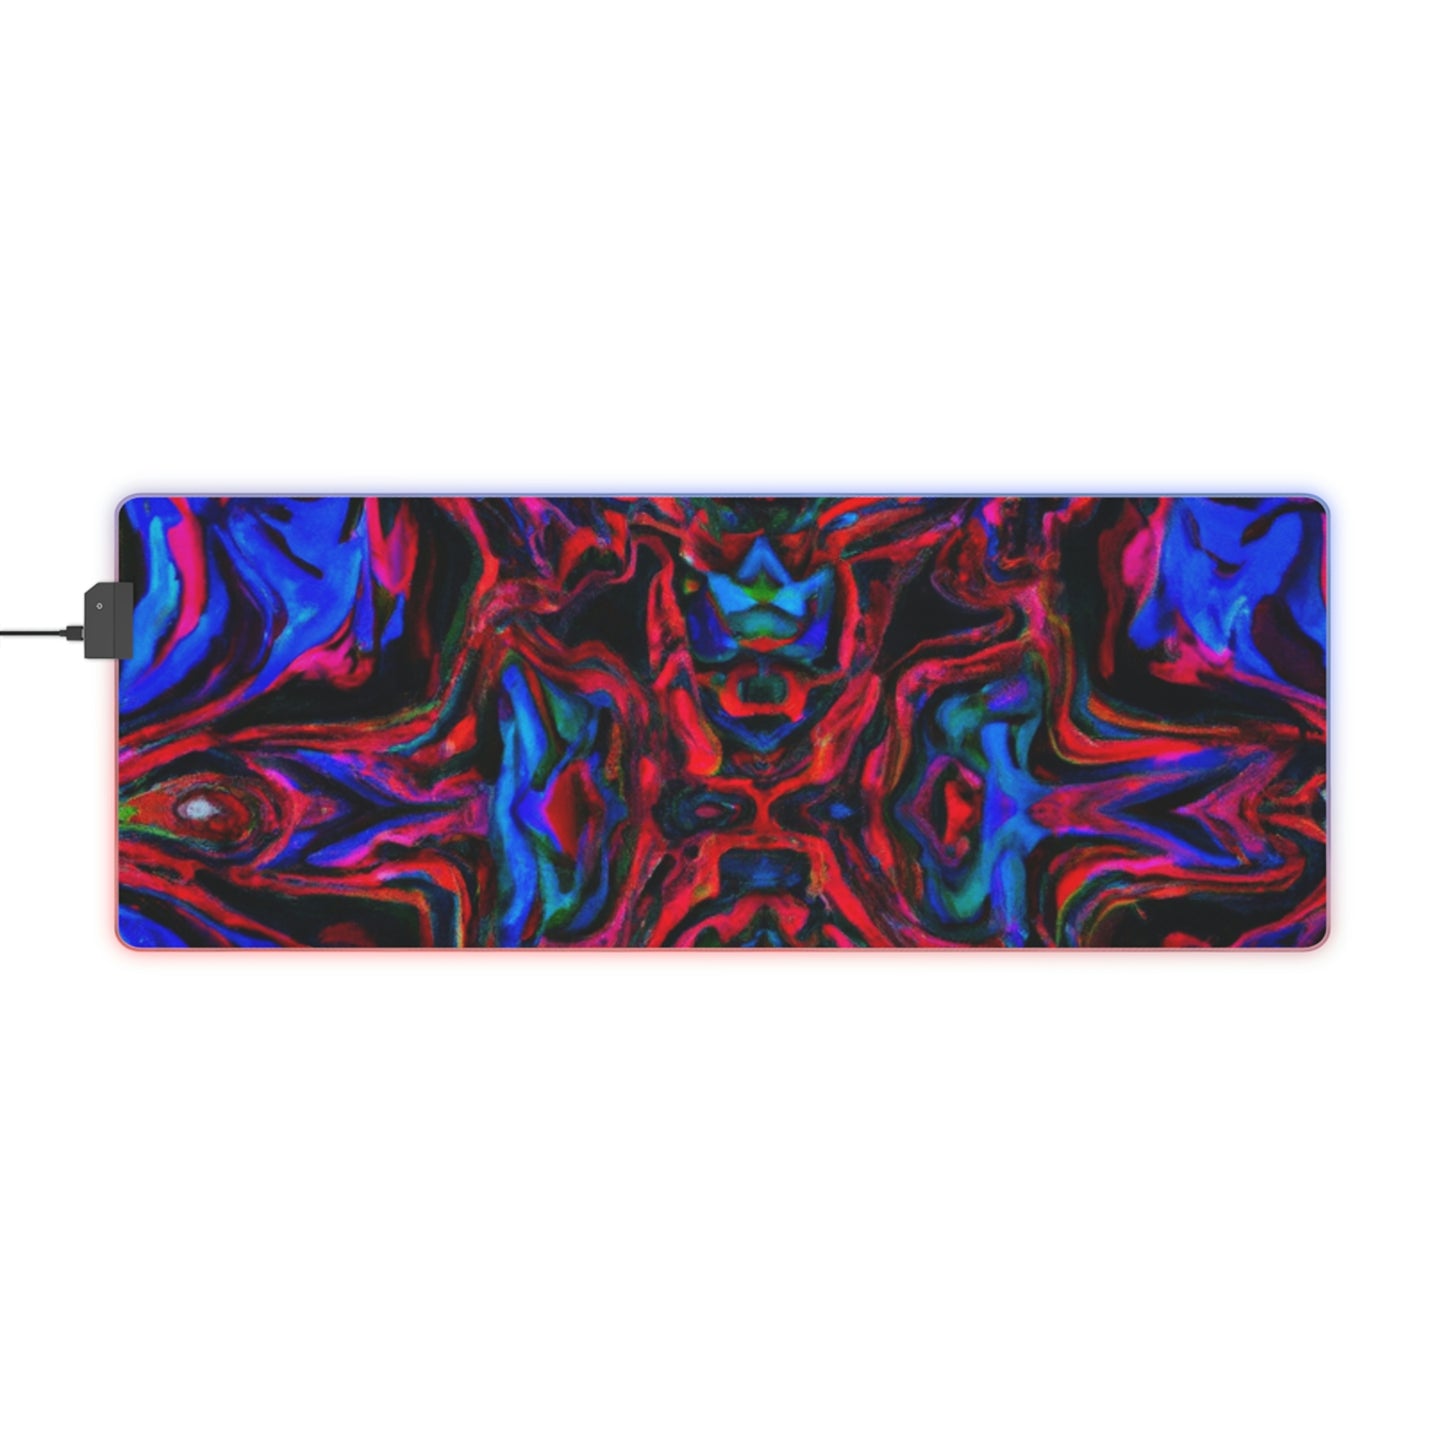 Lucy the Pinball Wizard - Psychedelic Trippy LED Light Up Gaming Mouse Pad